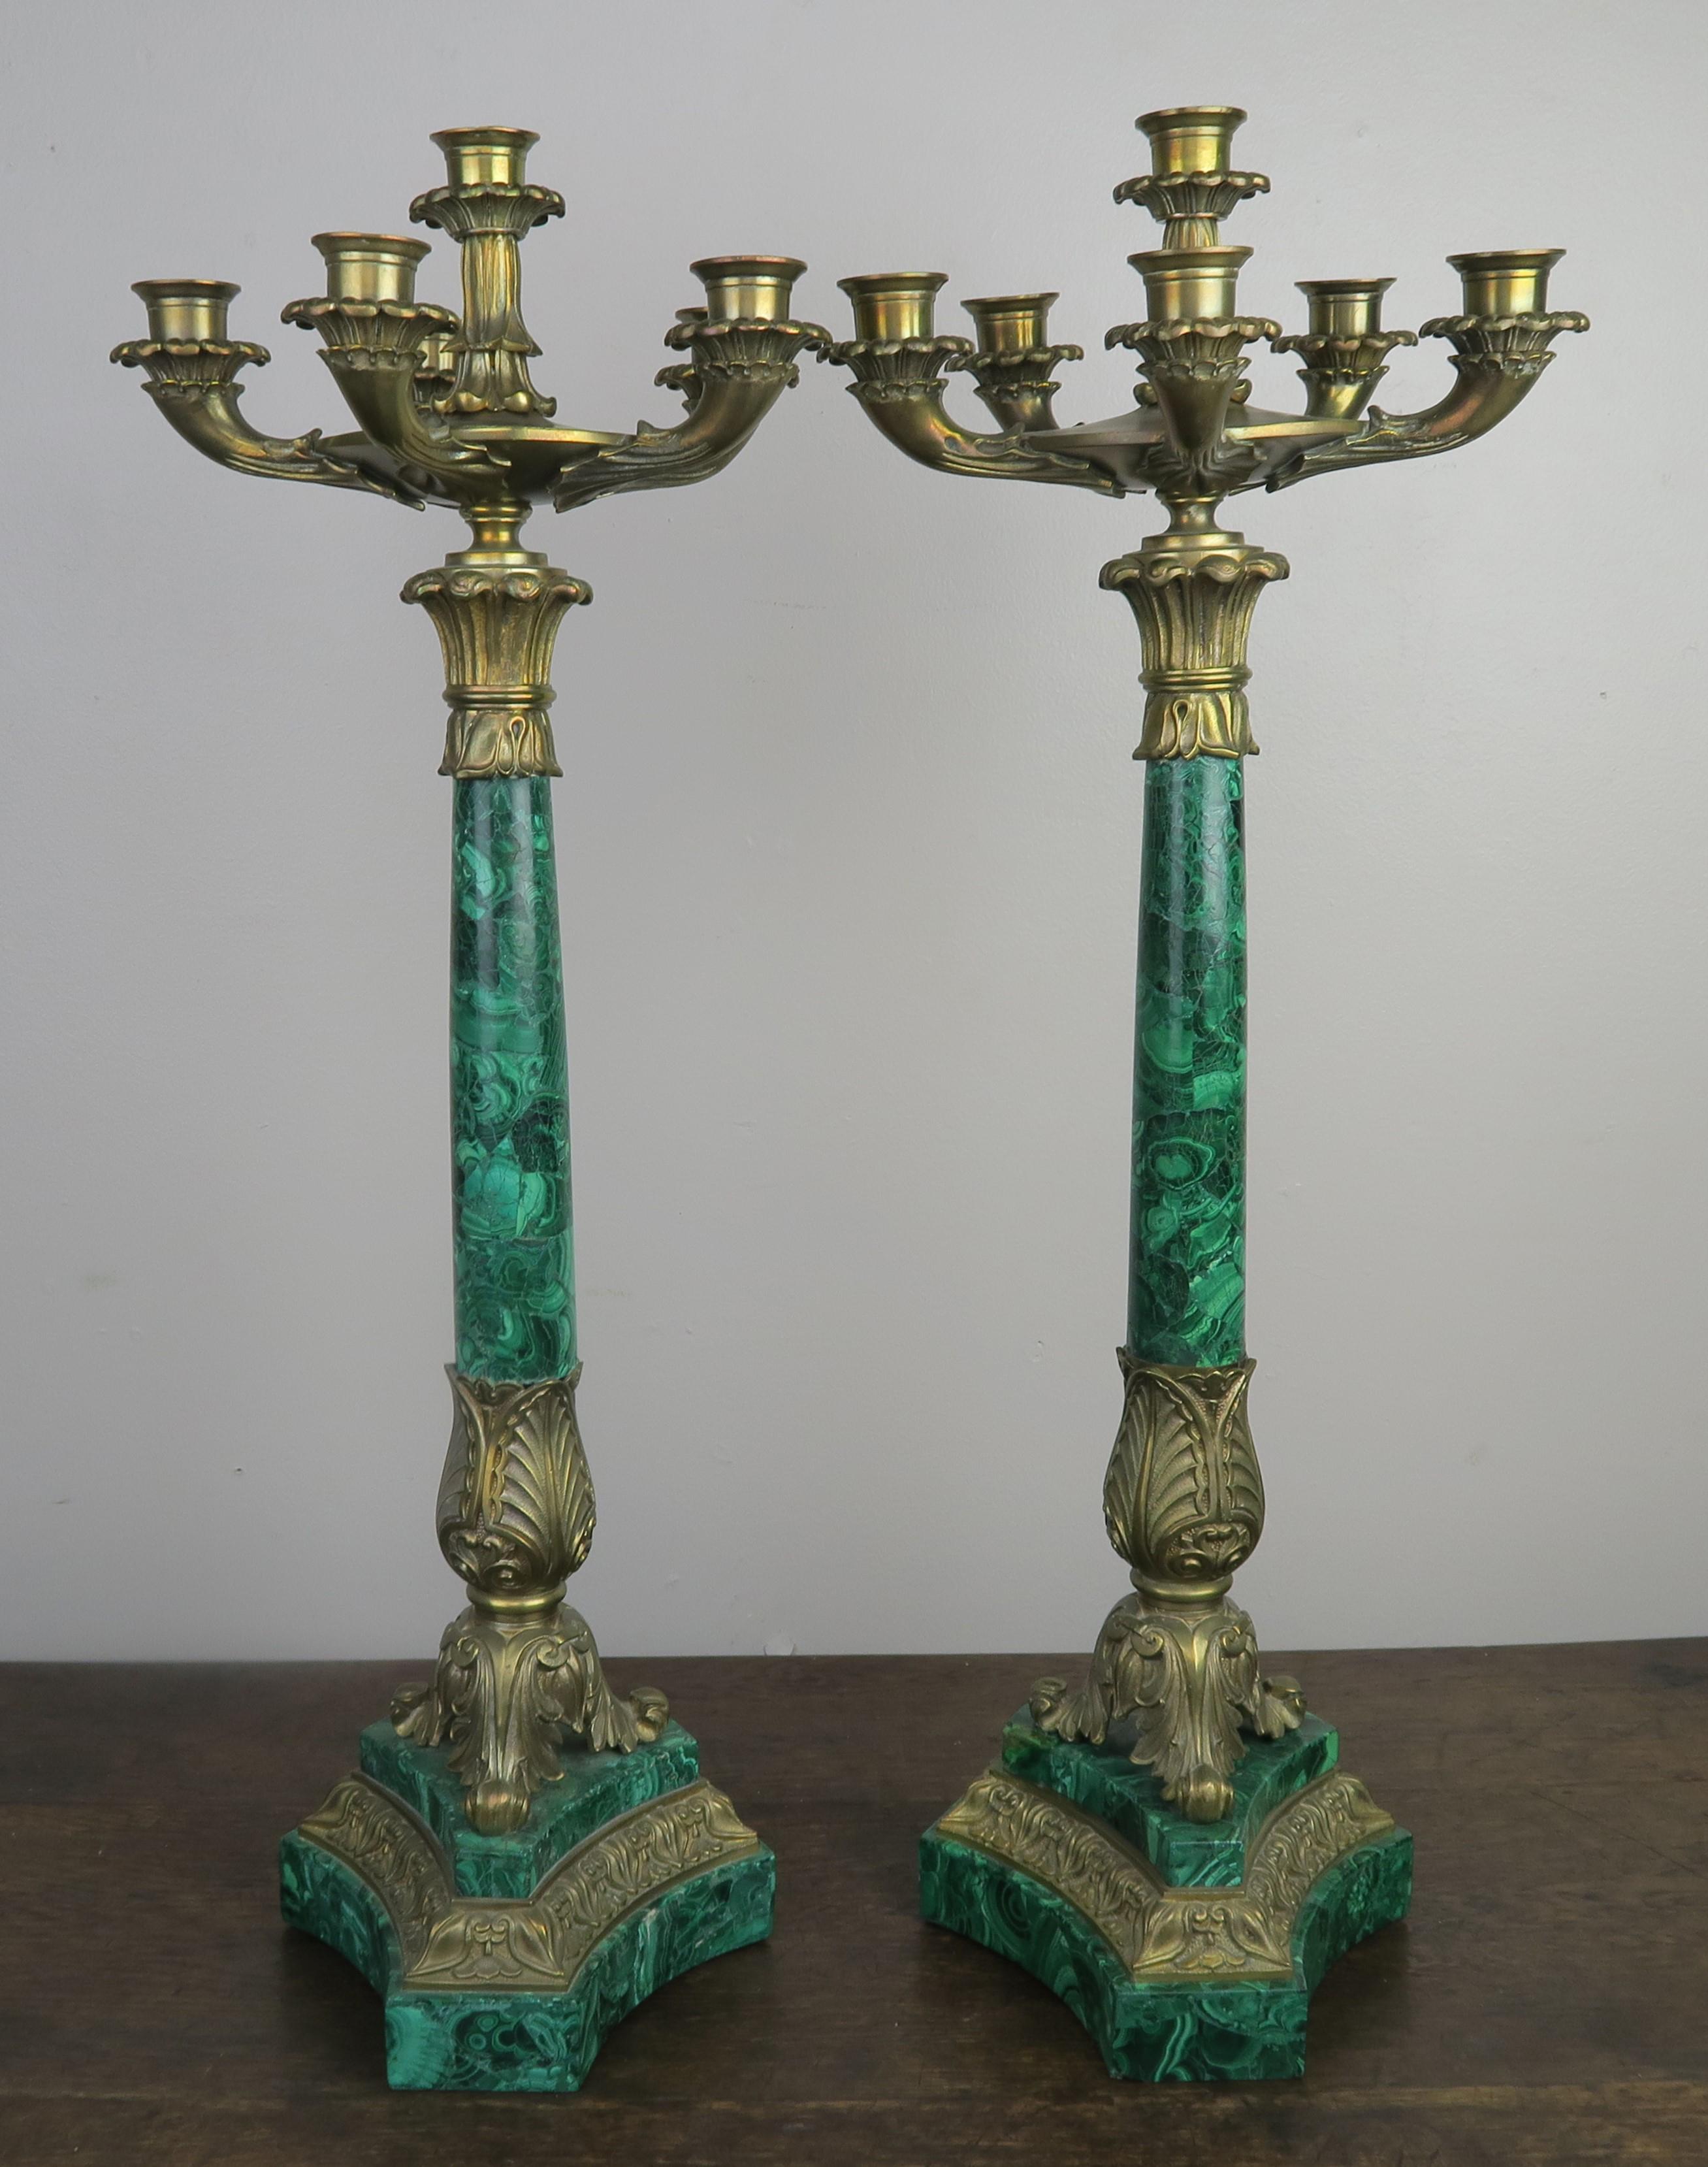 Pair of late 19th century most likely Russian bronze and Malachite 6-light candelabras.